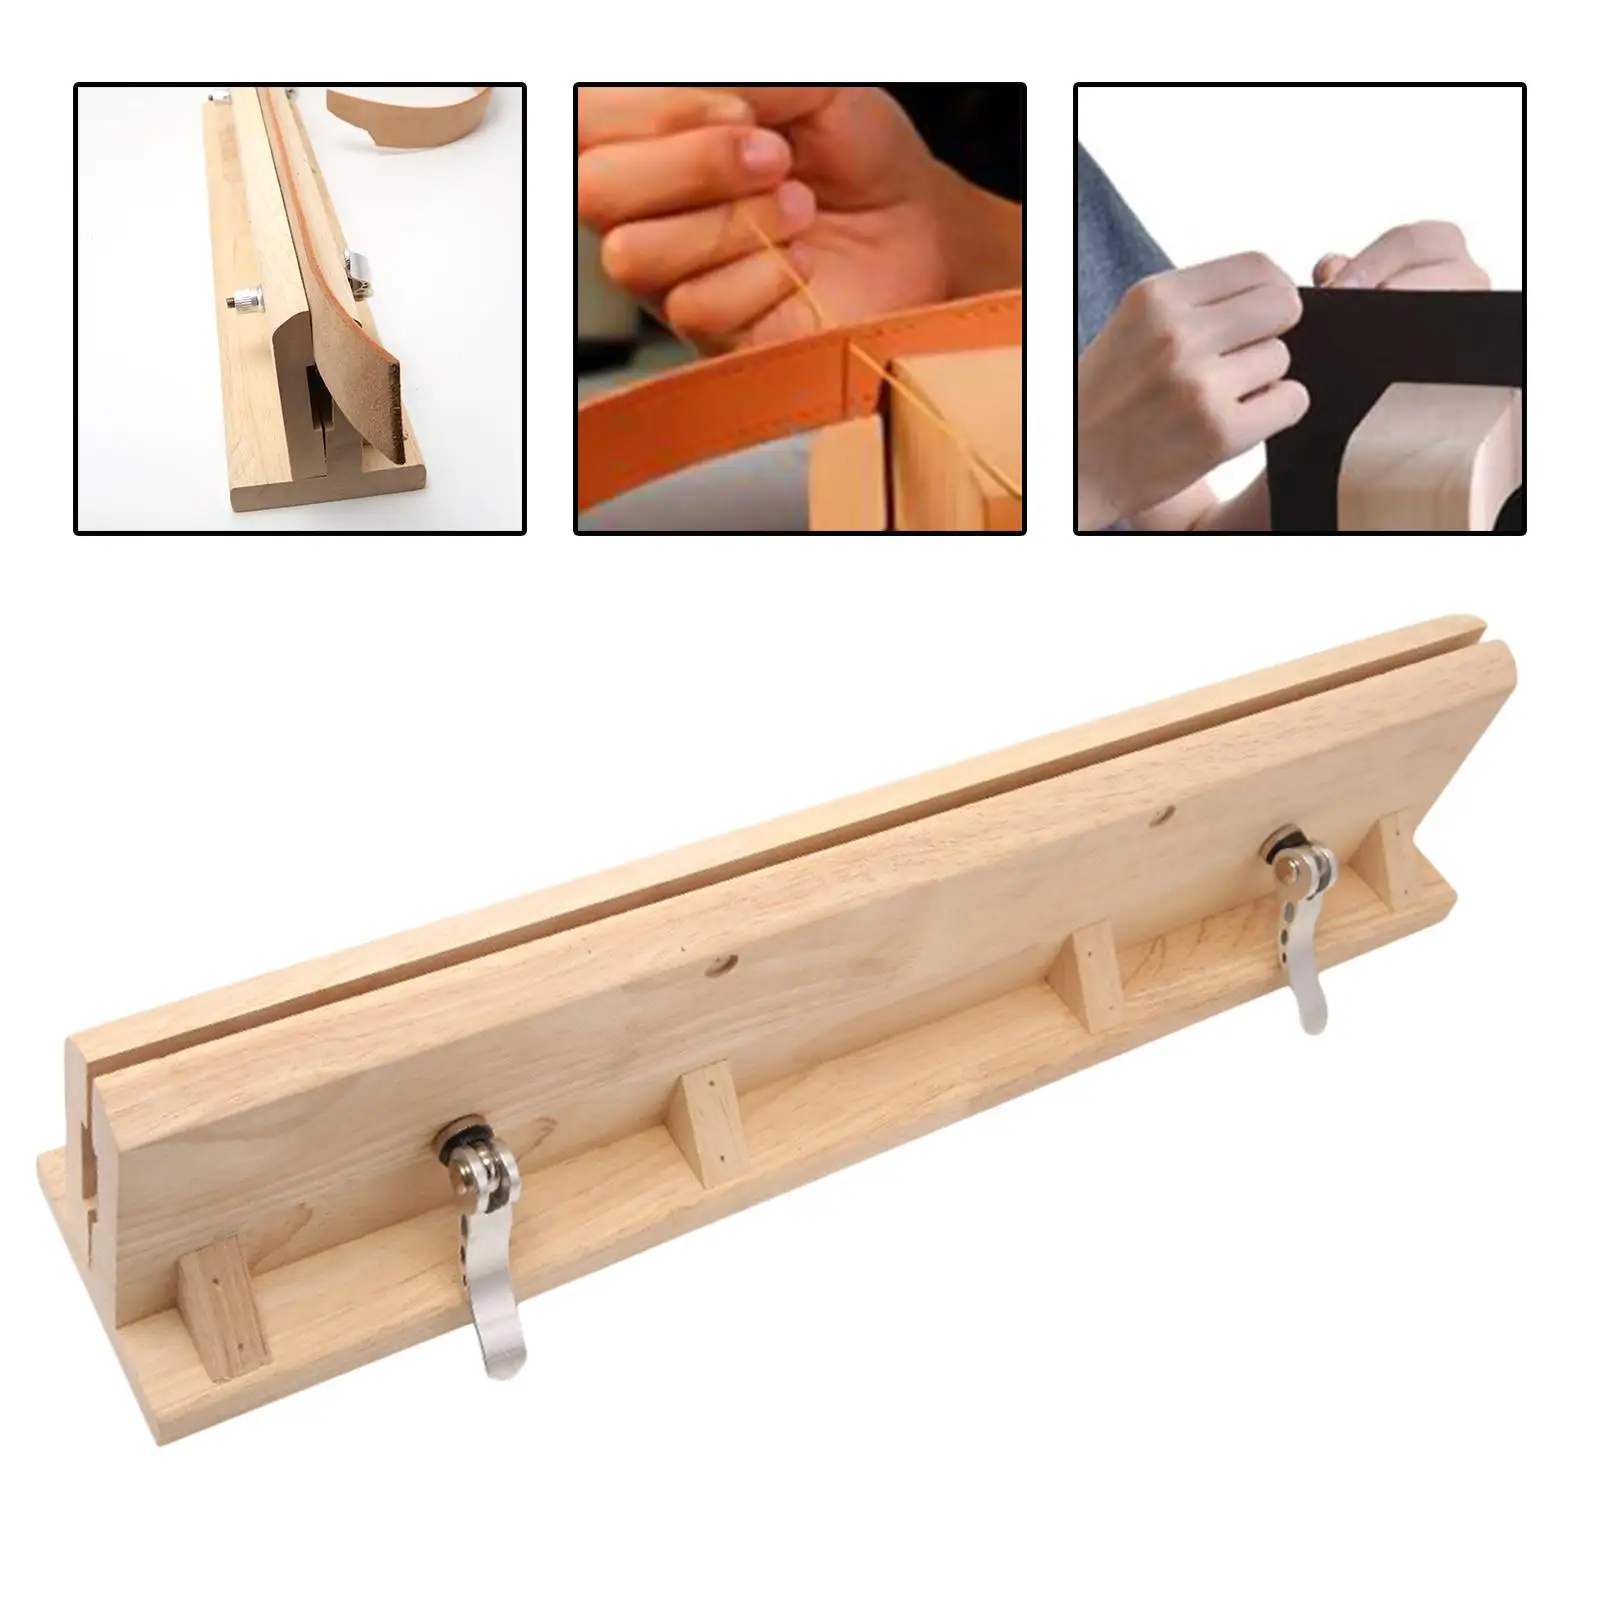 Hand-Stitched Sewing Horse Leathercraft Table Pony Clamp Leather Stitching Pony Wood For DIY Tools